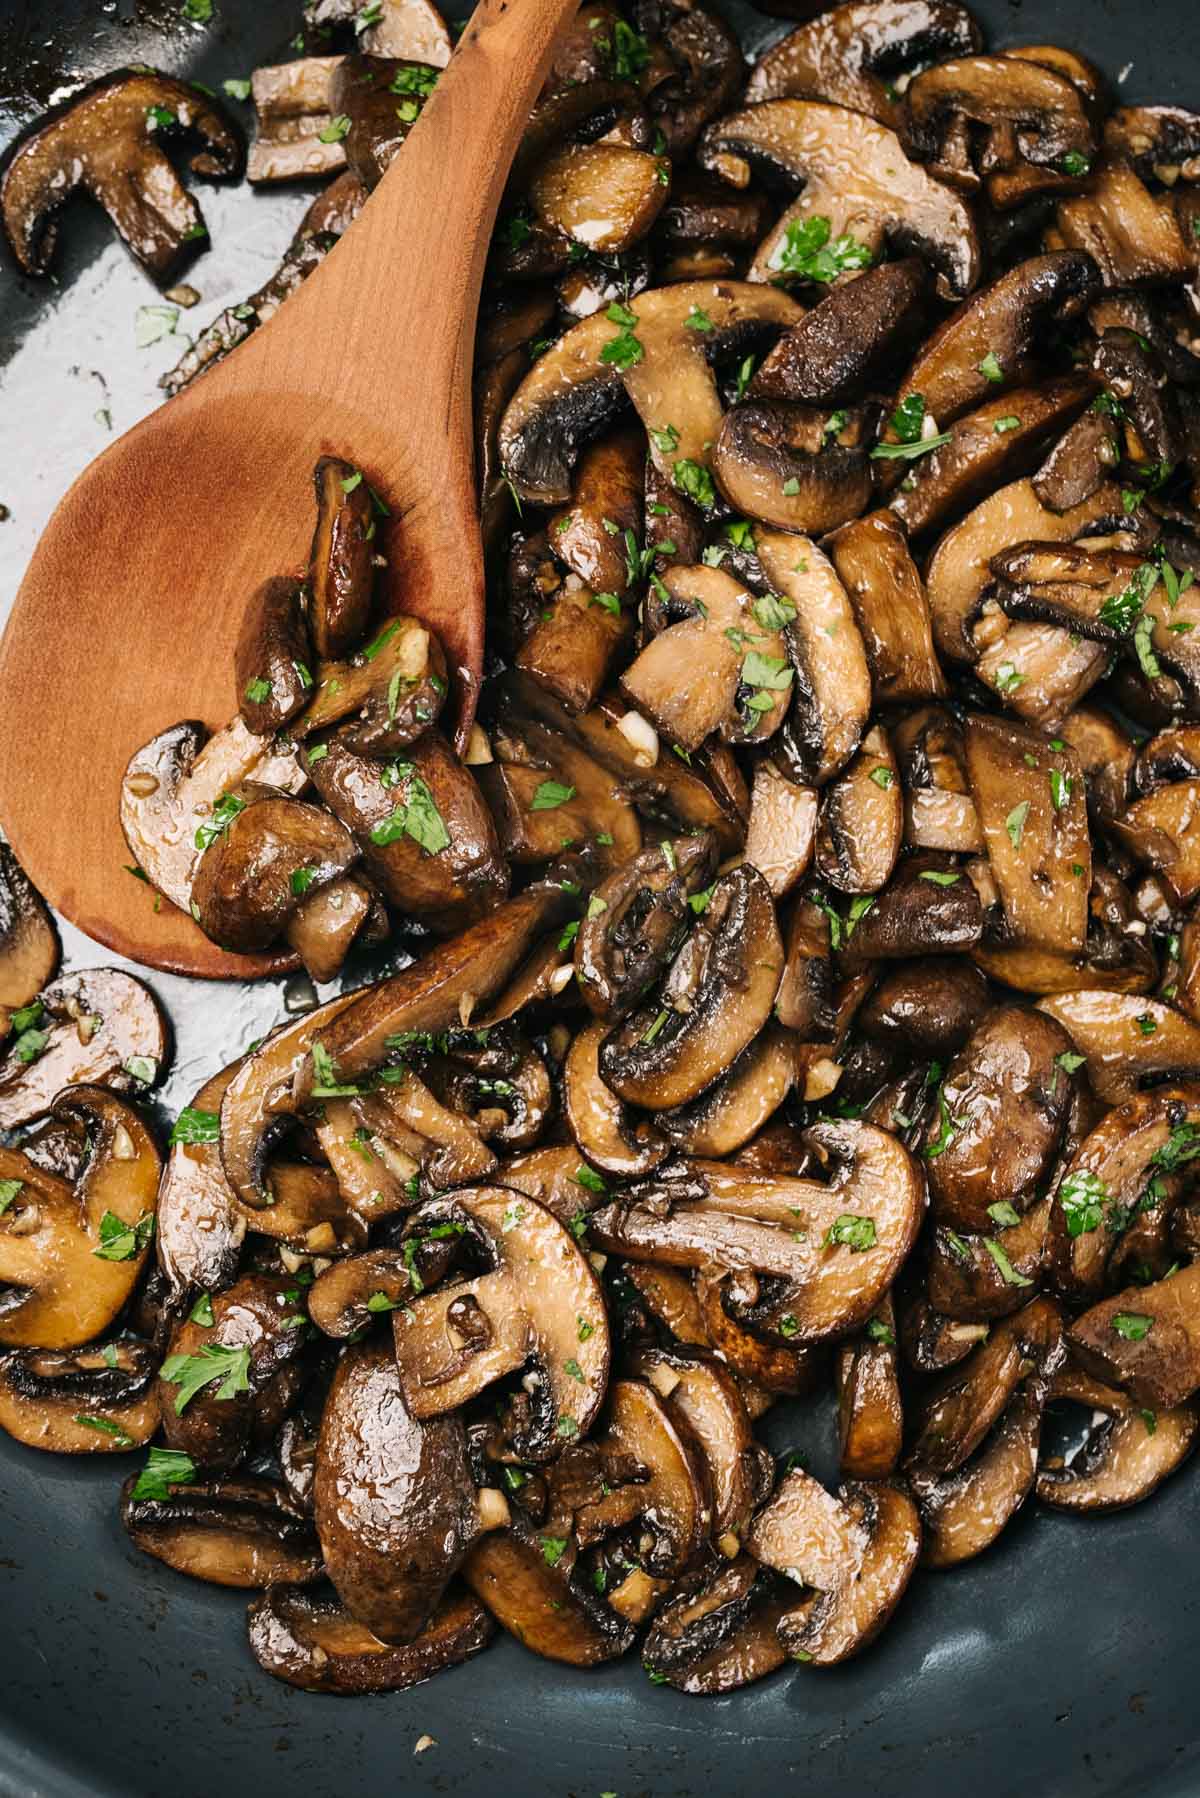 Detail of a wood spoon tucked into sautéed mushrooms garnished with fresh parsley in a skillet.